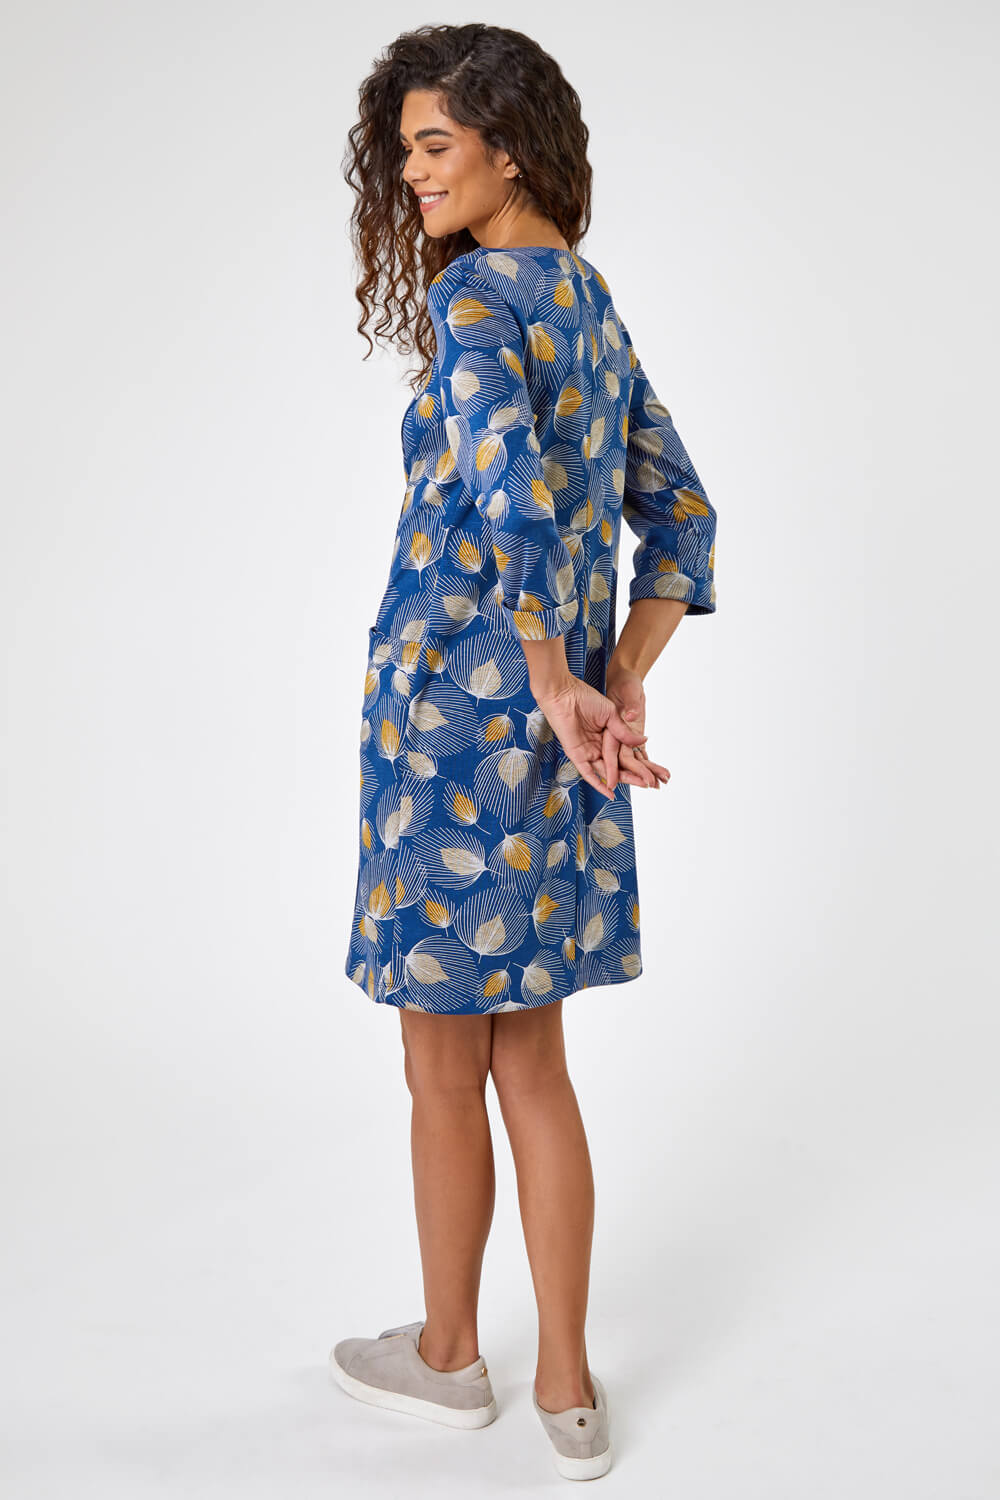 Blue Graphic Floral Panel Shift Dress, Image 2 of 5